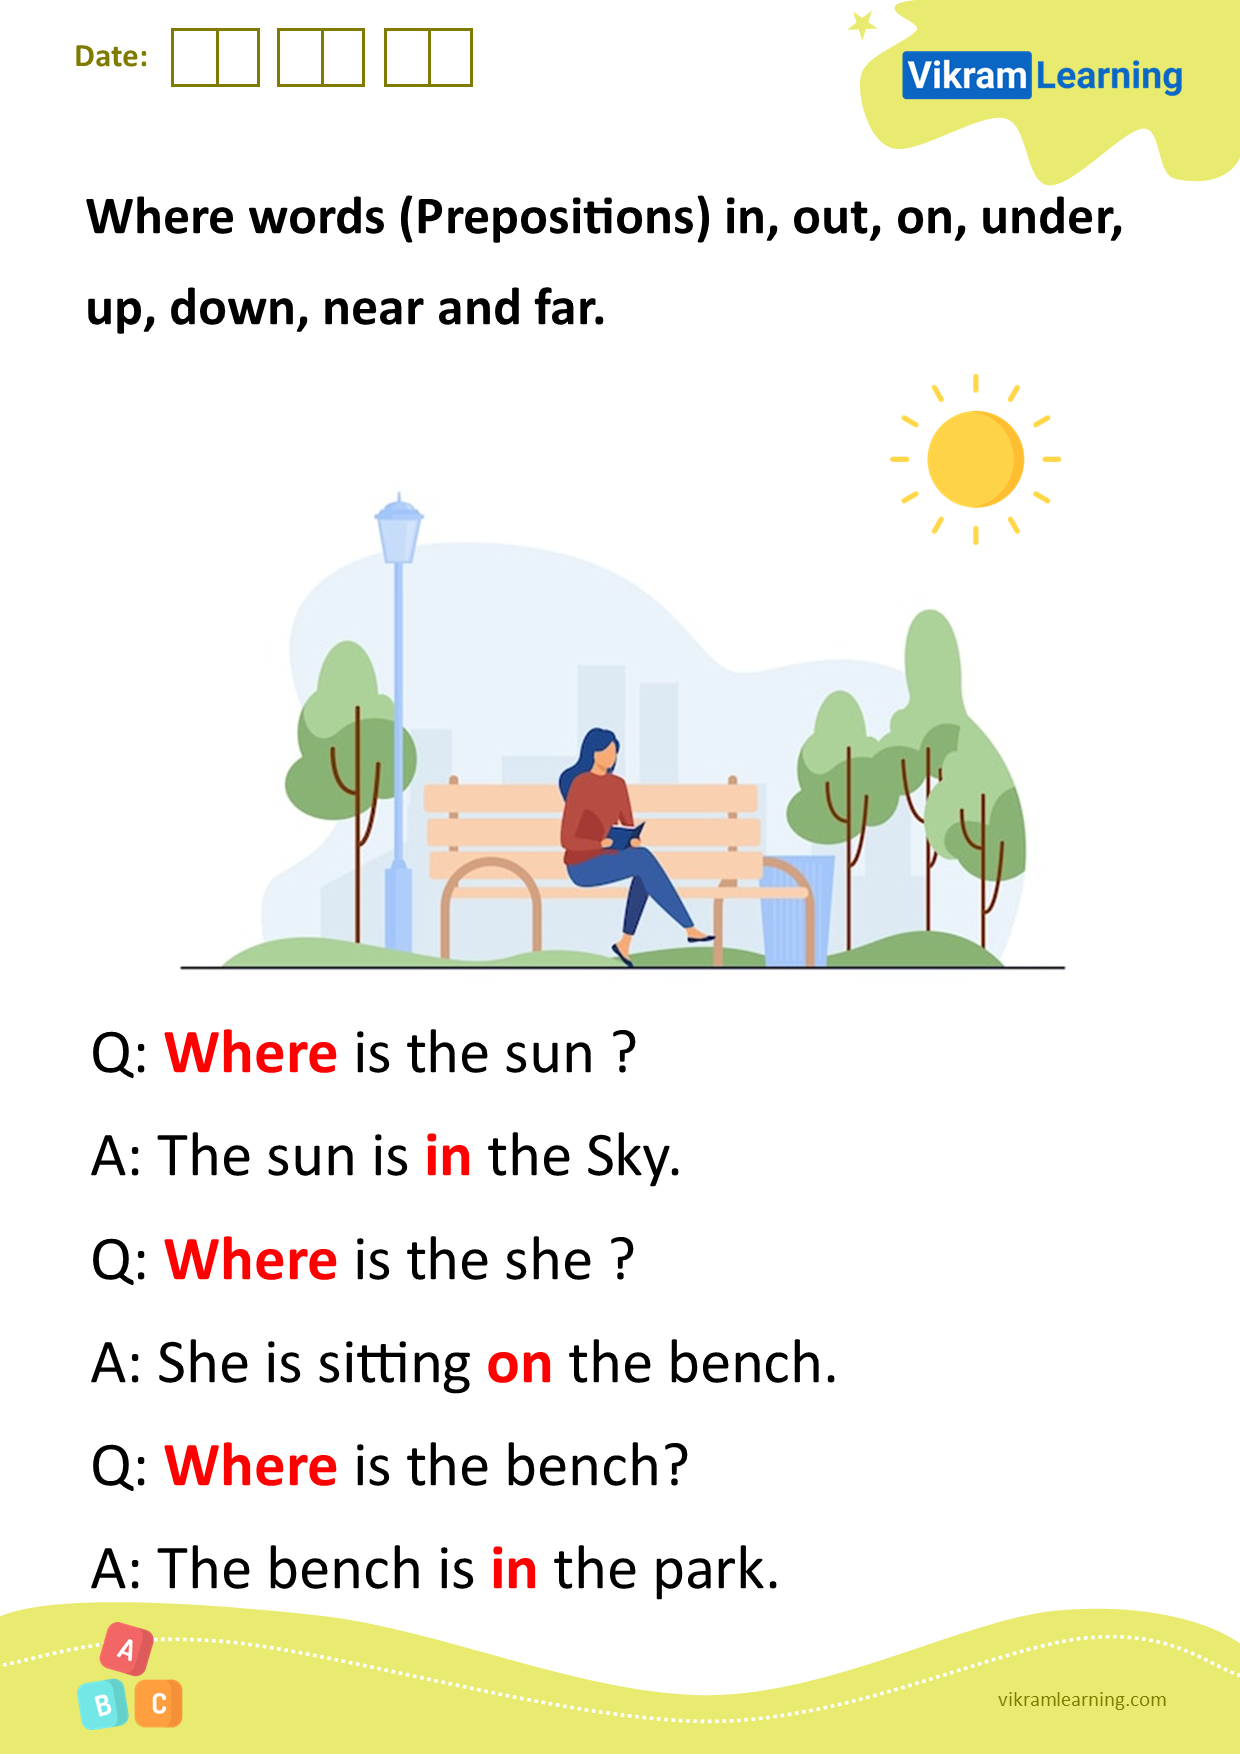 Download where words (prepositions) in, out, on, under, up, down, near, and far worksheets